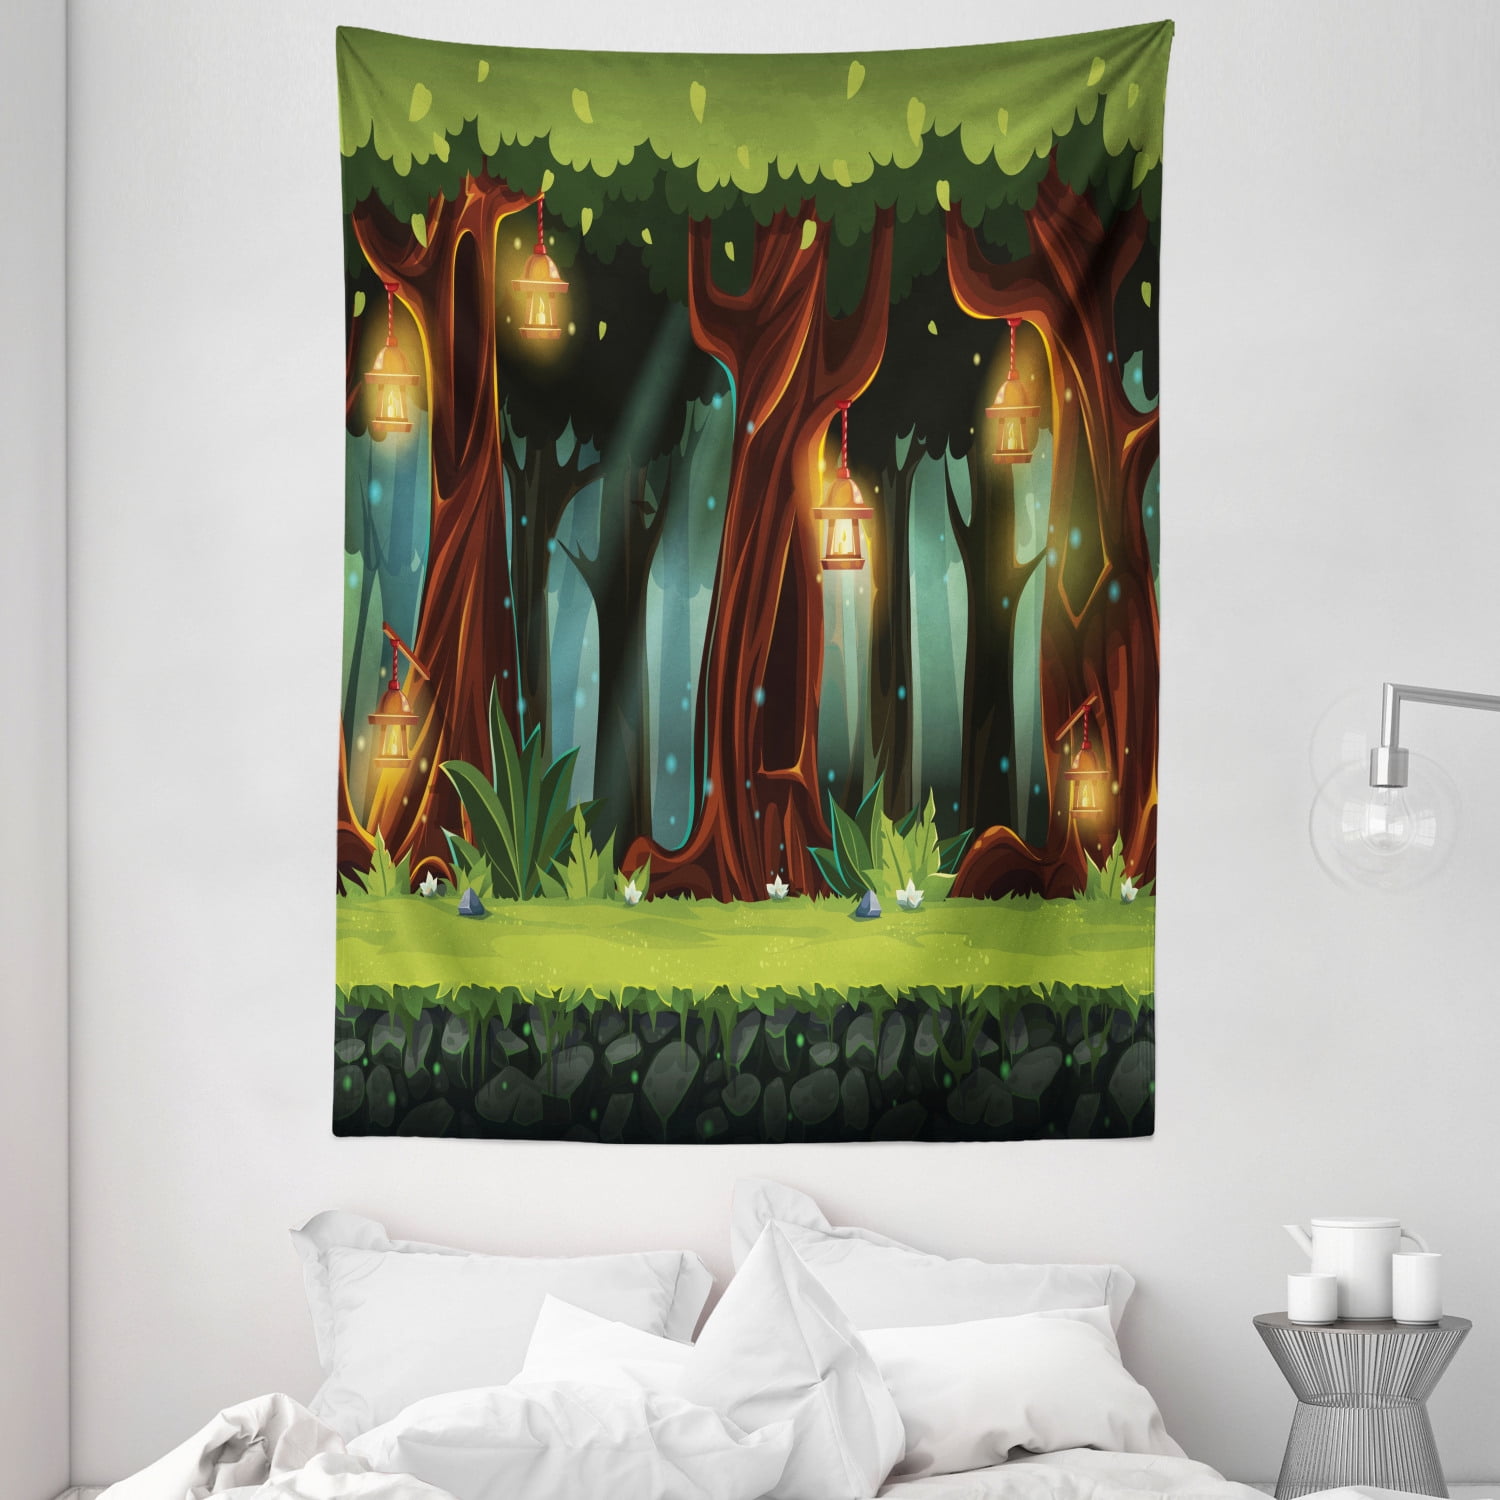 Fairytale Magic Forest Lanterns Tapestry Wall Hanging Living Room Bedroom Dorm 